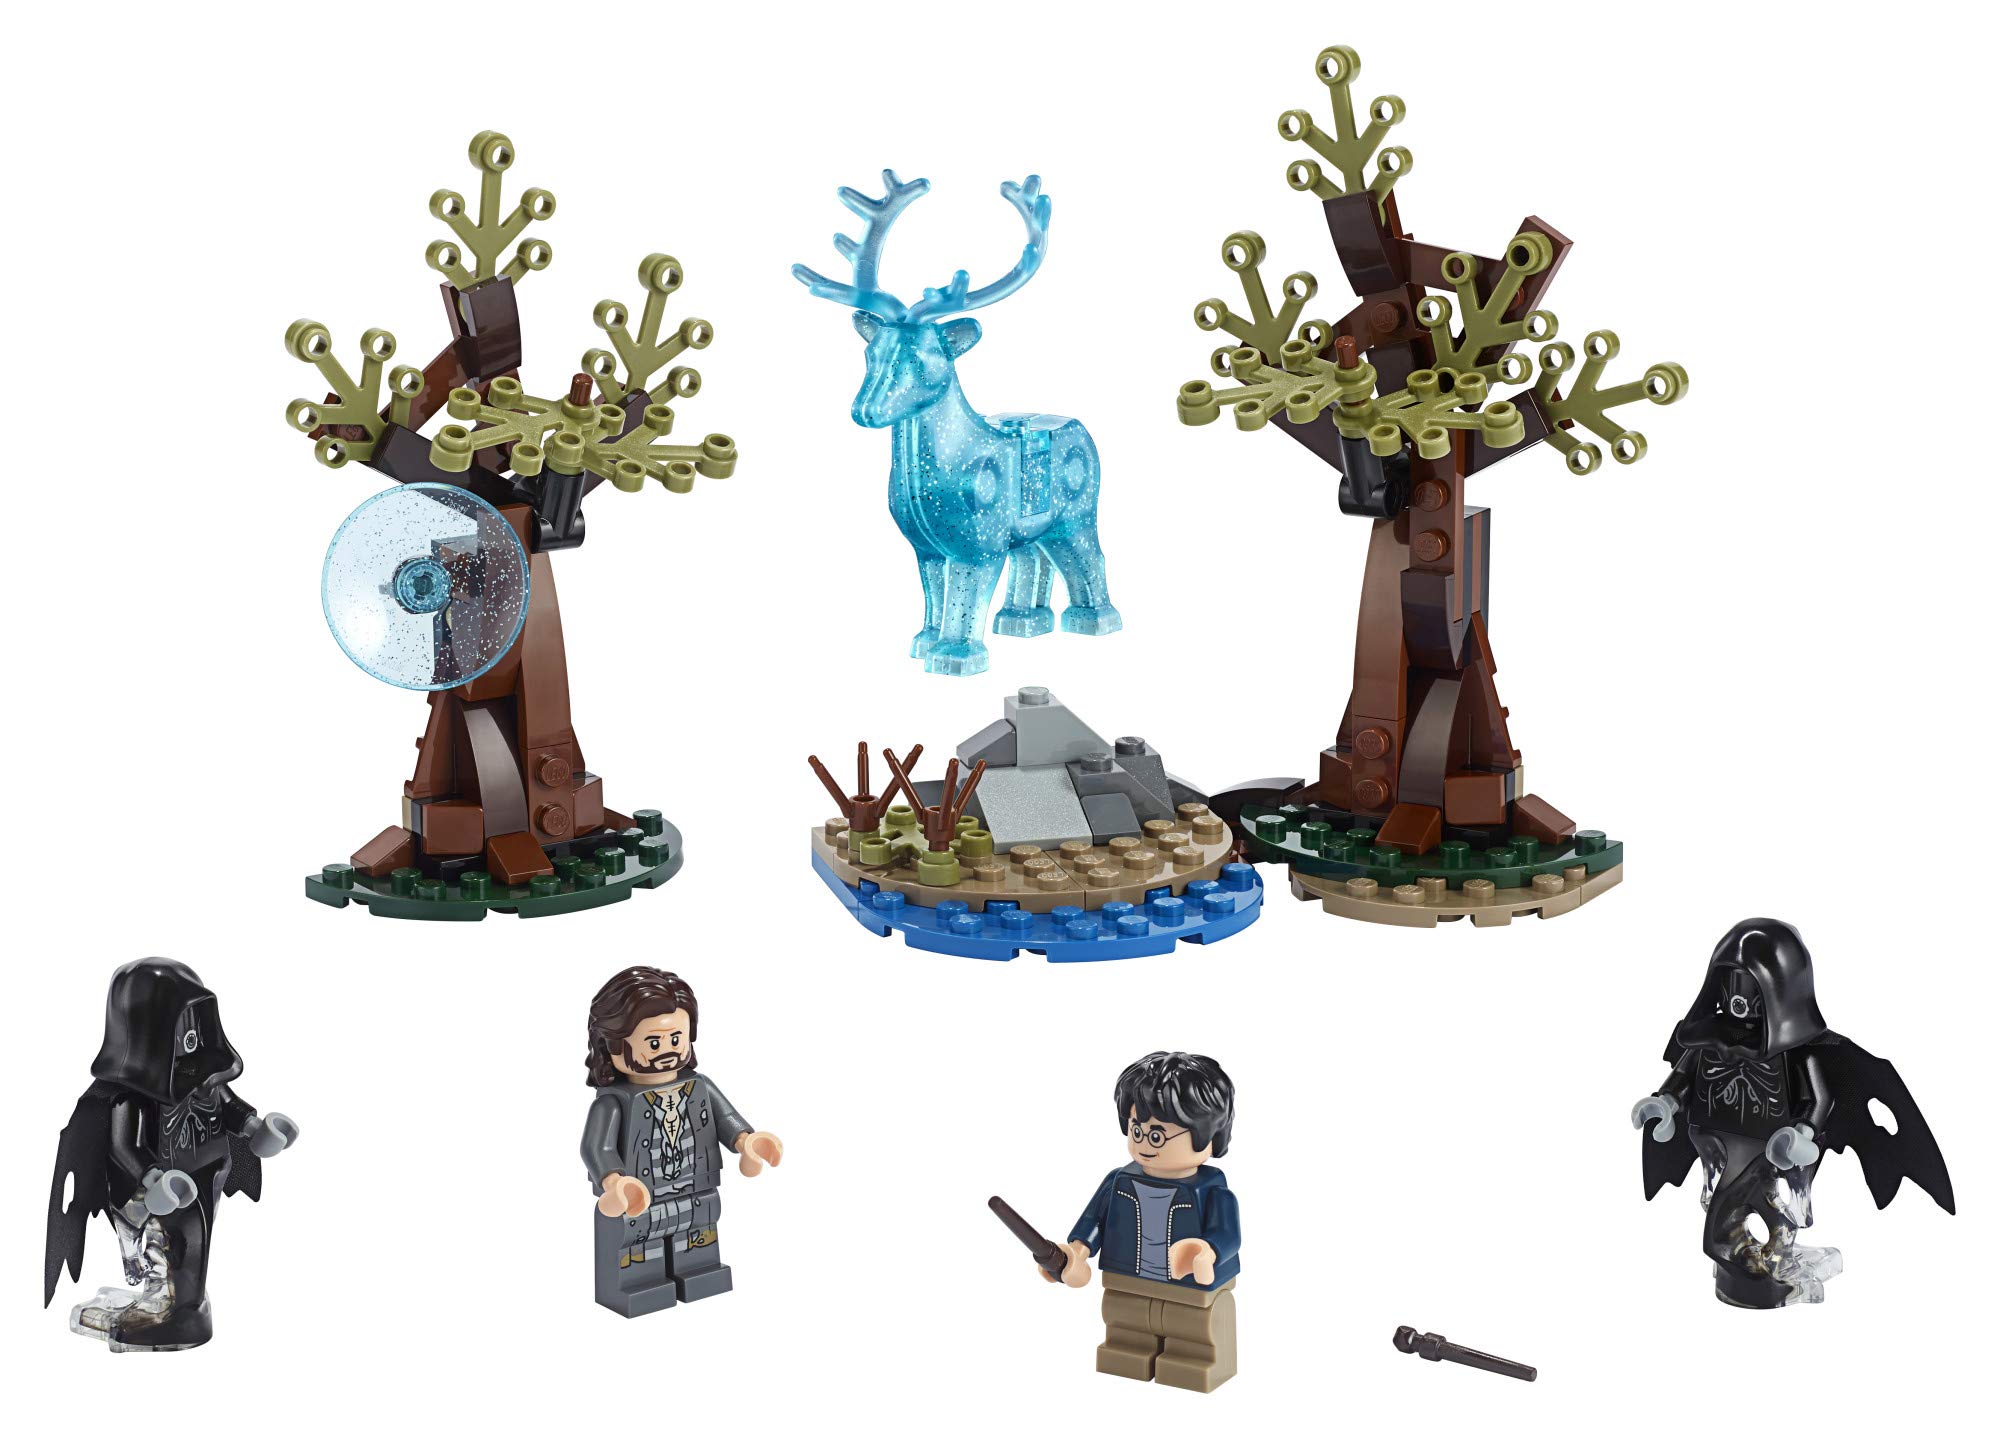 LEGO Harry Potter and The Prisoner of Azkaban Expecto Patronum 75945 Building Kit (121 Pieces)